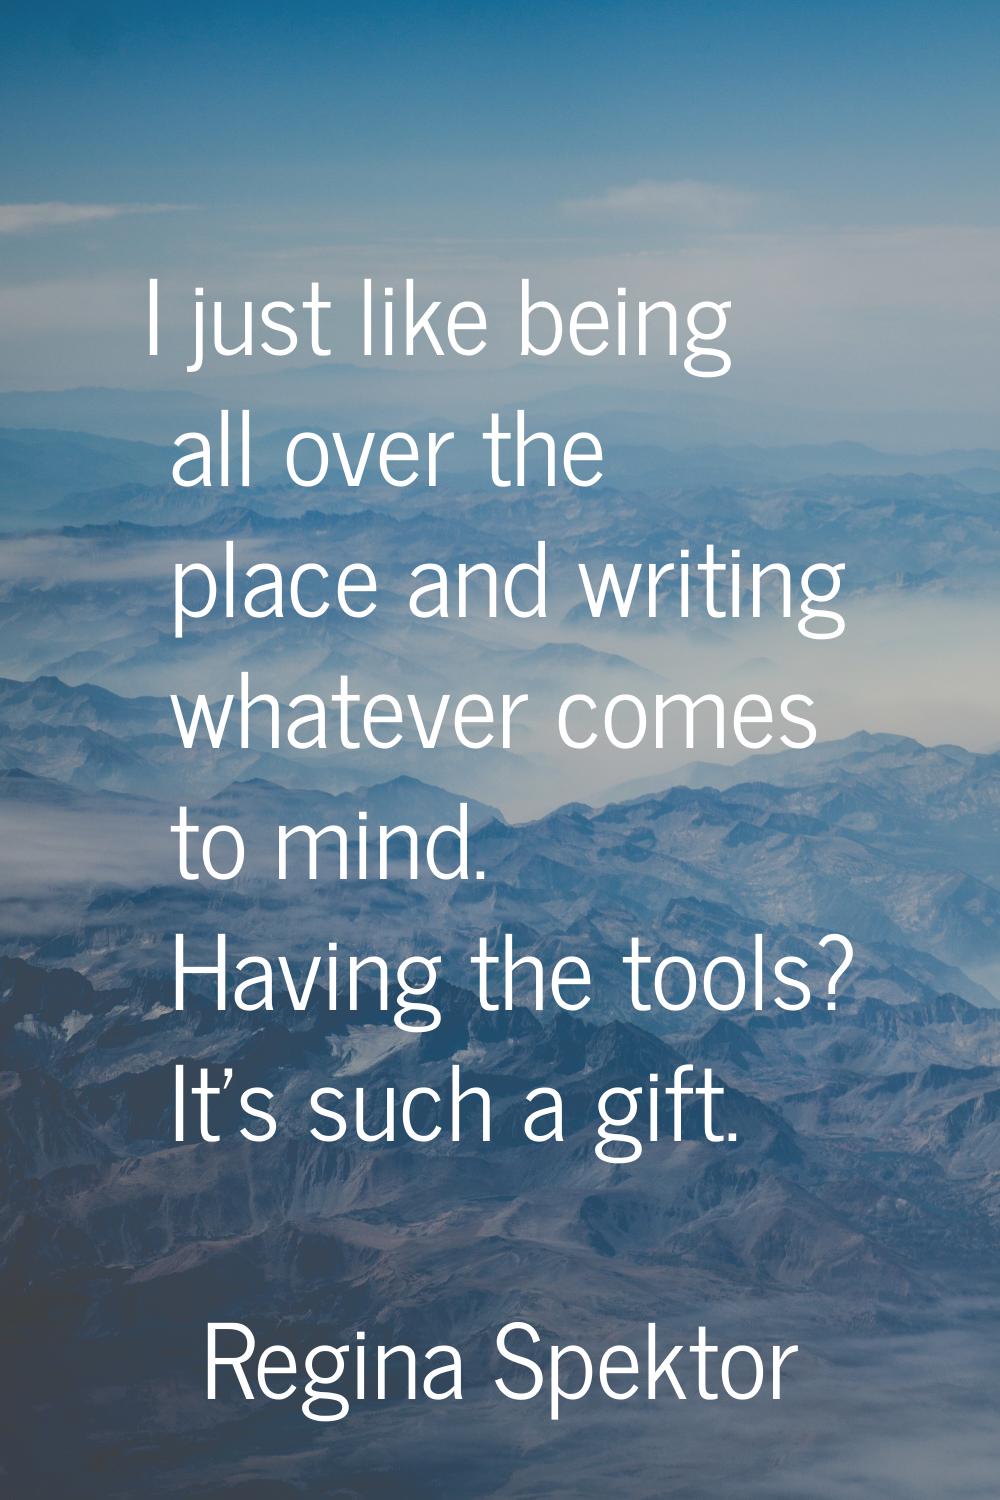 I just like being all over the place and writing whatever comes to mind. Having the tools? It's suc